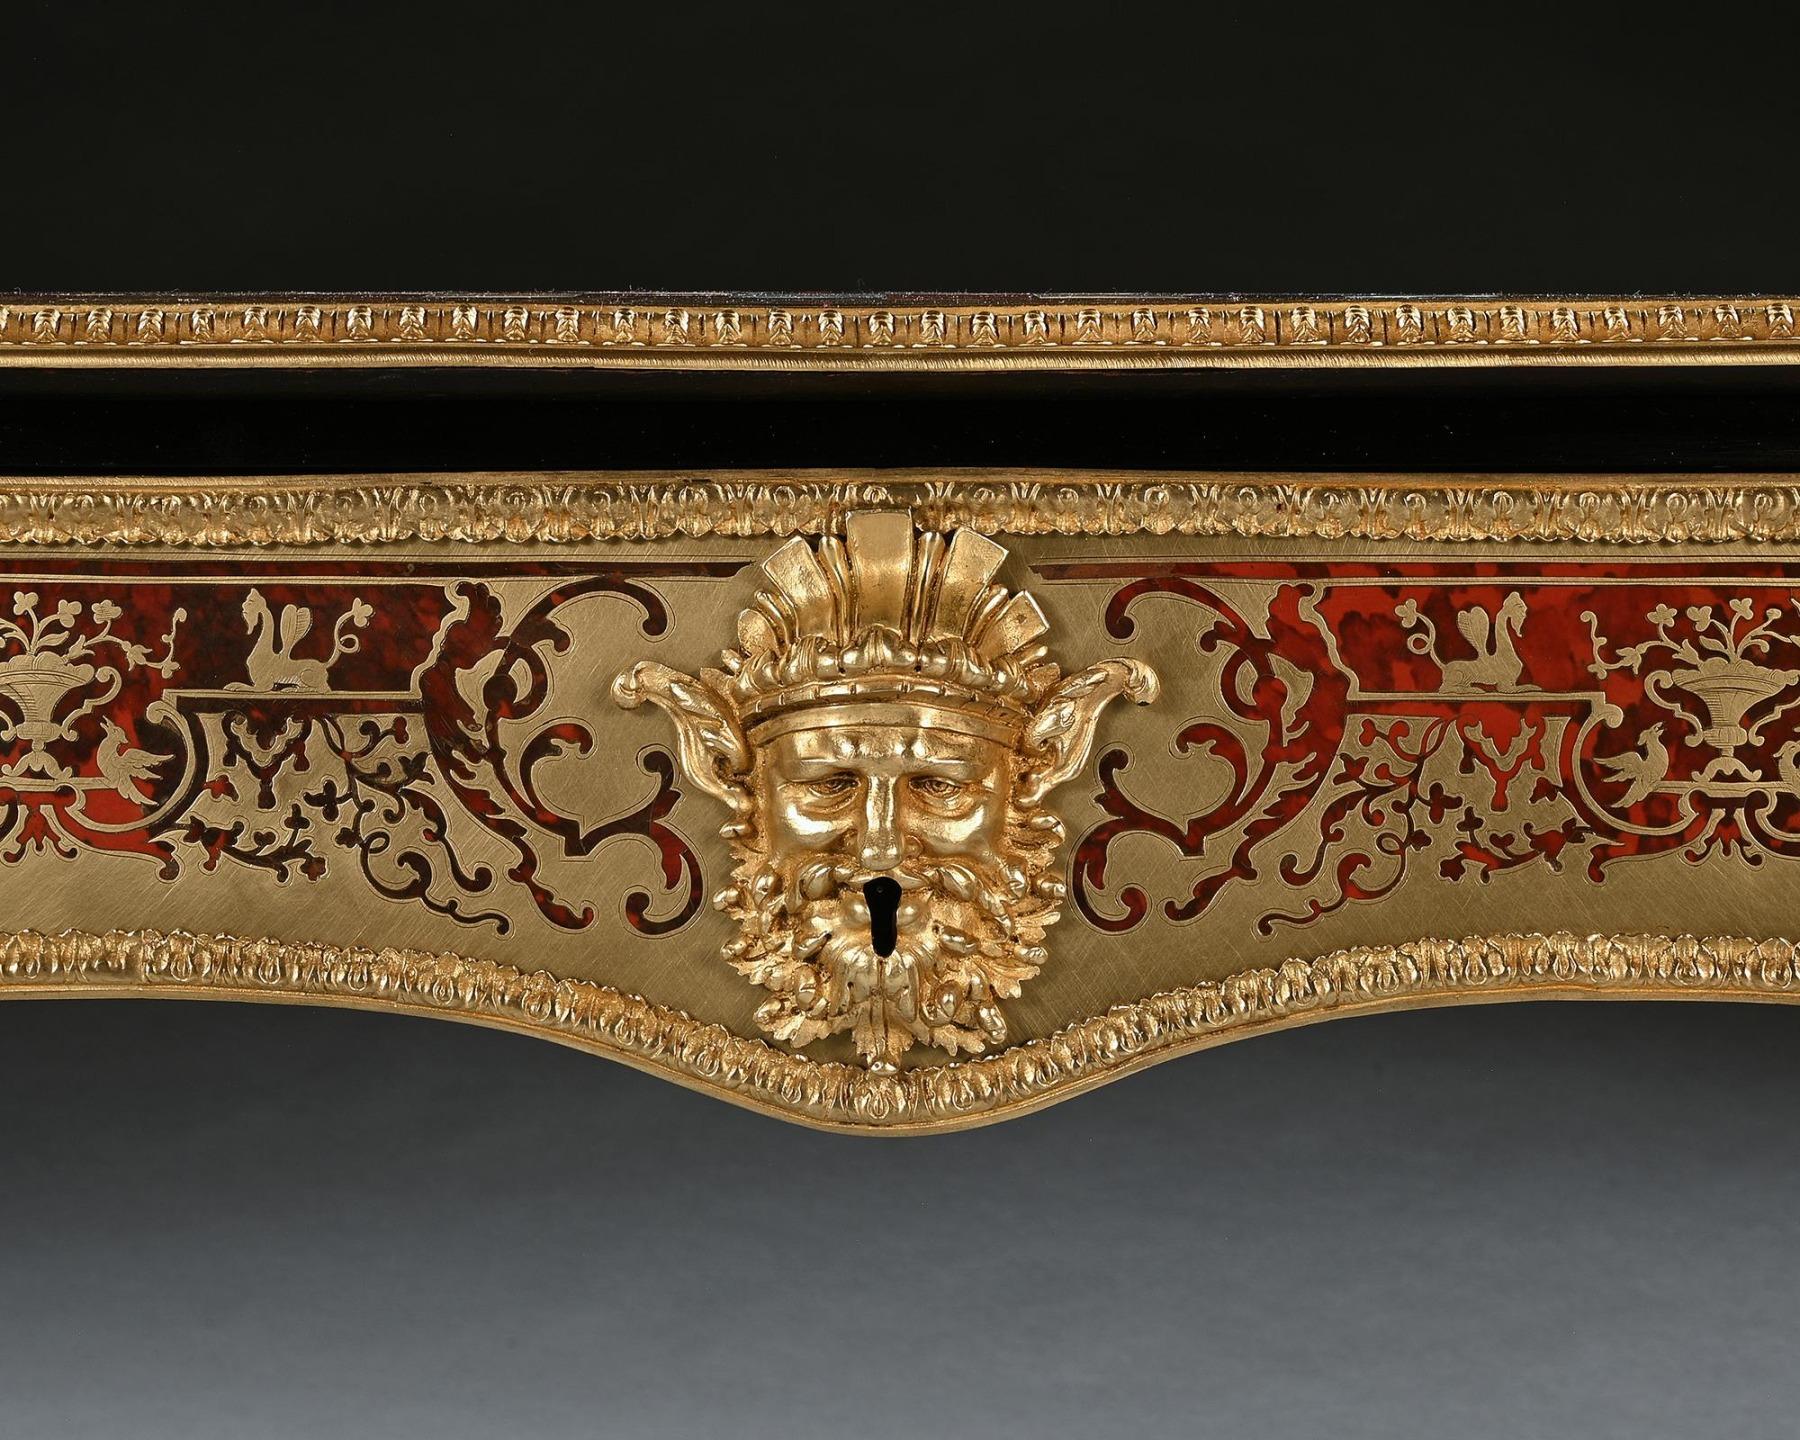 An Exceptional George Iv Period Boulle Games Table Attributed to Thomas Parker In Good Condition For Sale In Benington, Herts